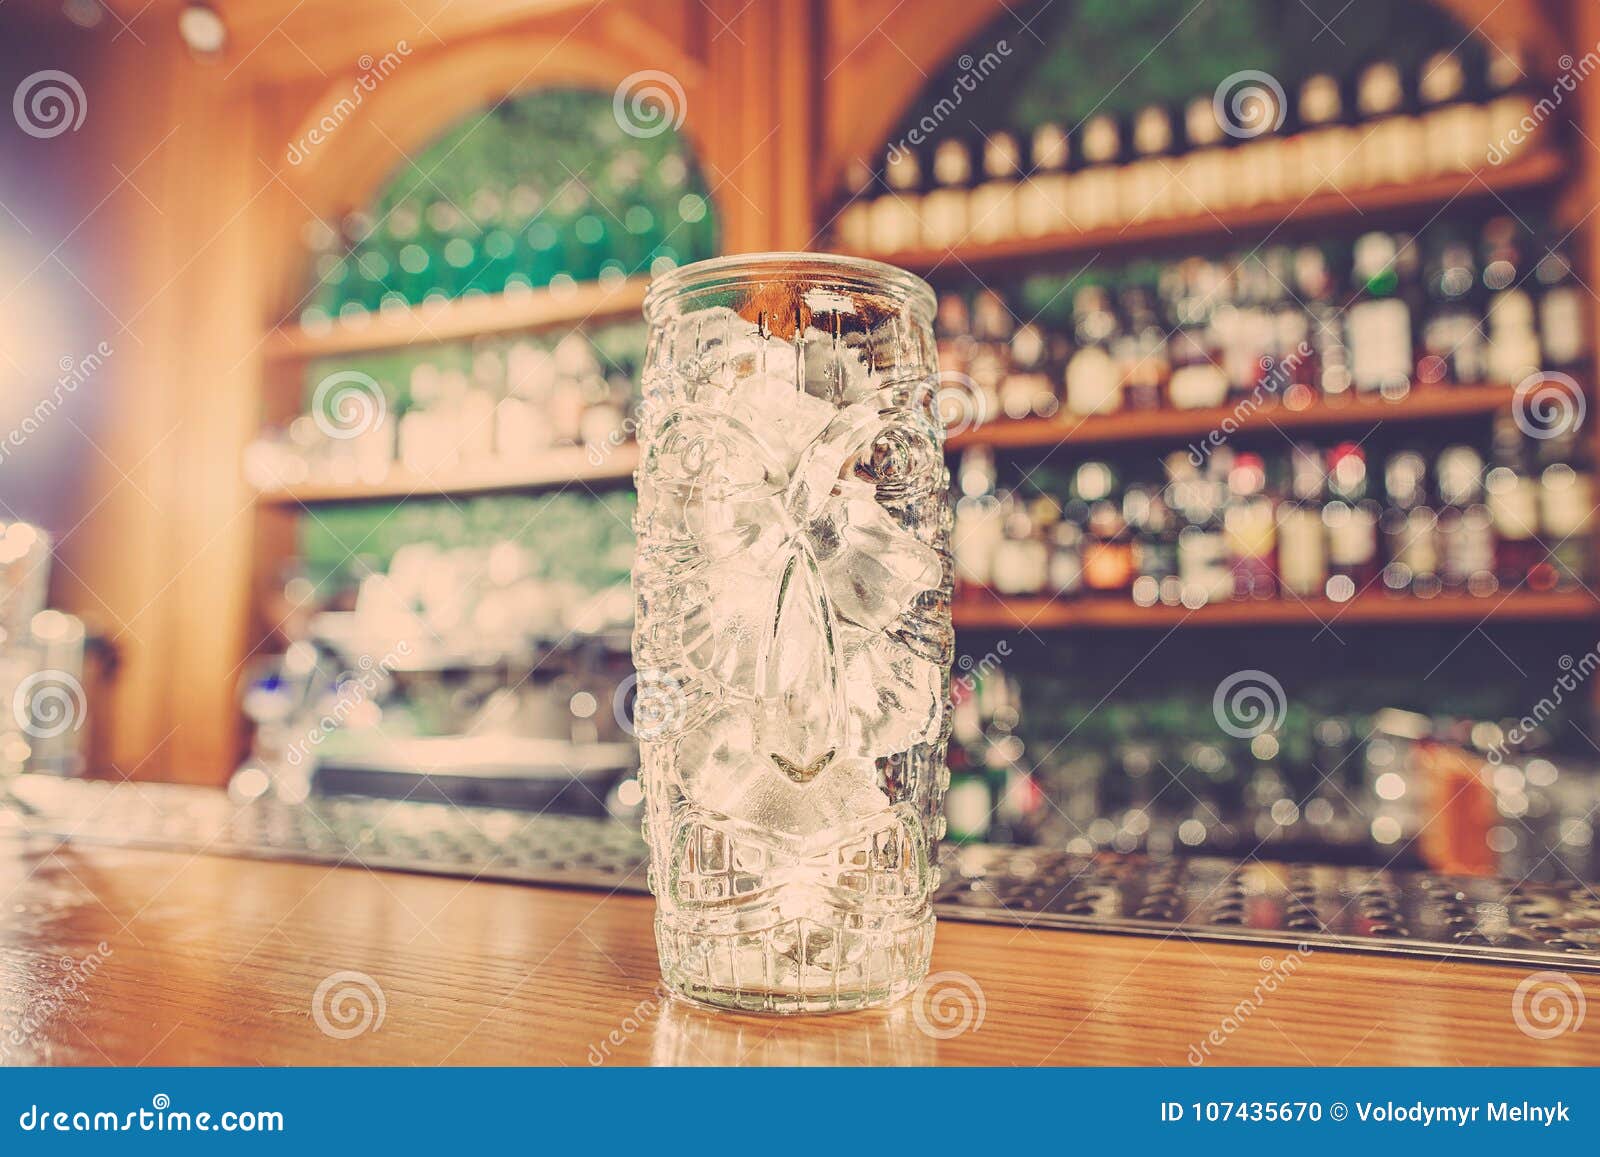 washed professional bar equipment and a glass filled with ice